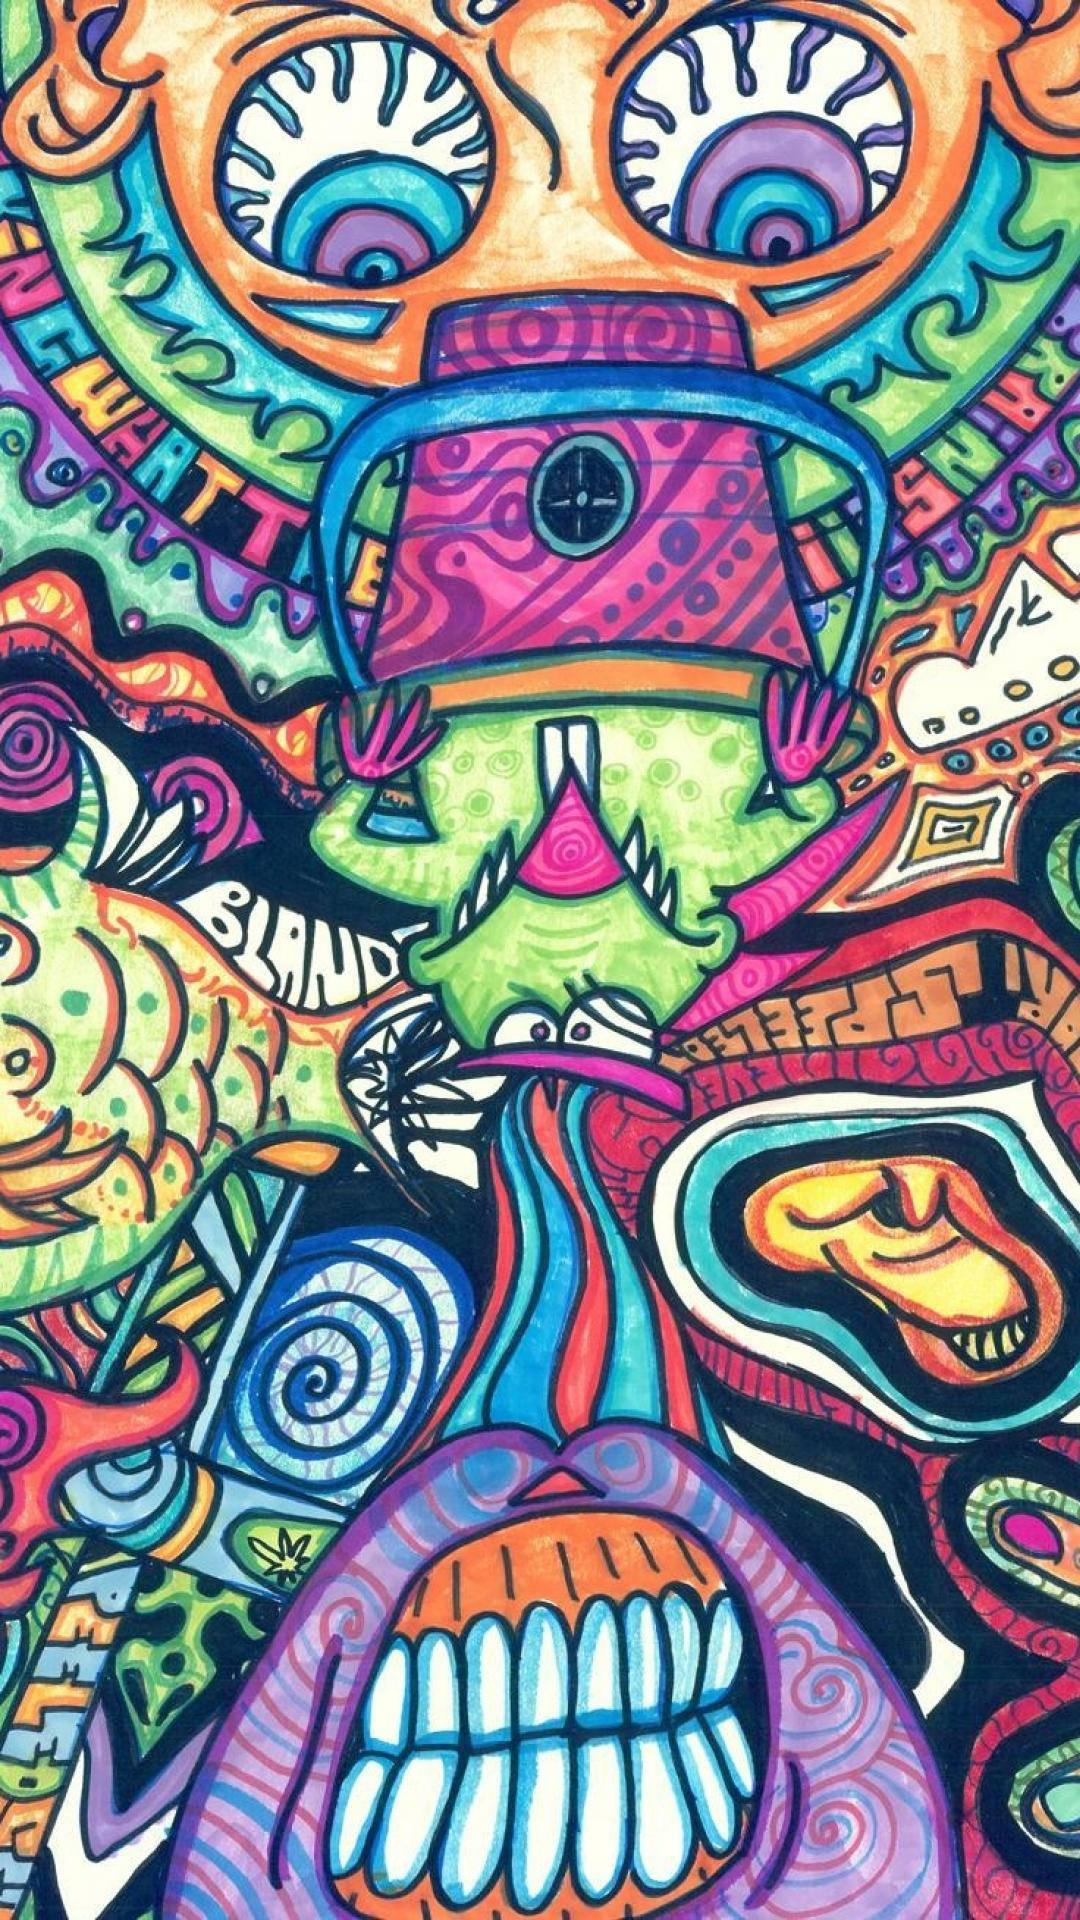 TrippyWally on Twitter Download Psychedelic Wallpapers   httpstcoaCrje9Wo8S trippy psychedelic hippie trippyart acid  psychedelia sacredgeometry iphone wallpaper android  httpstcoeSsiNfXfqr  Twitter